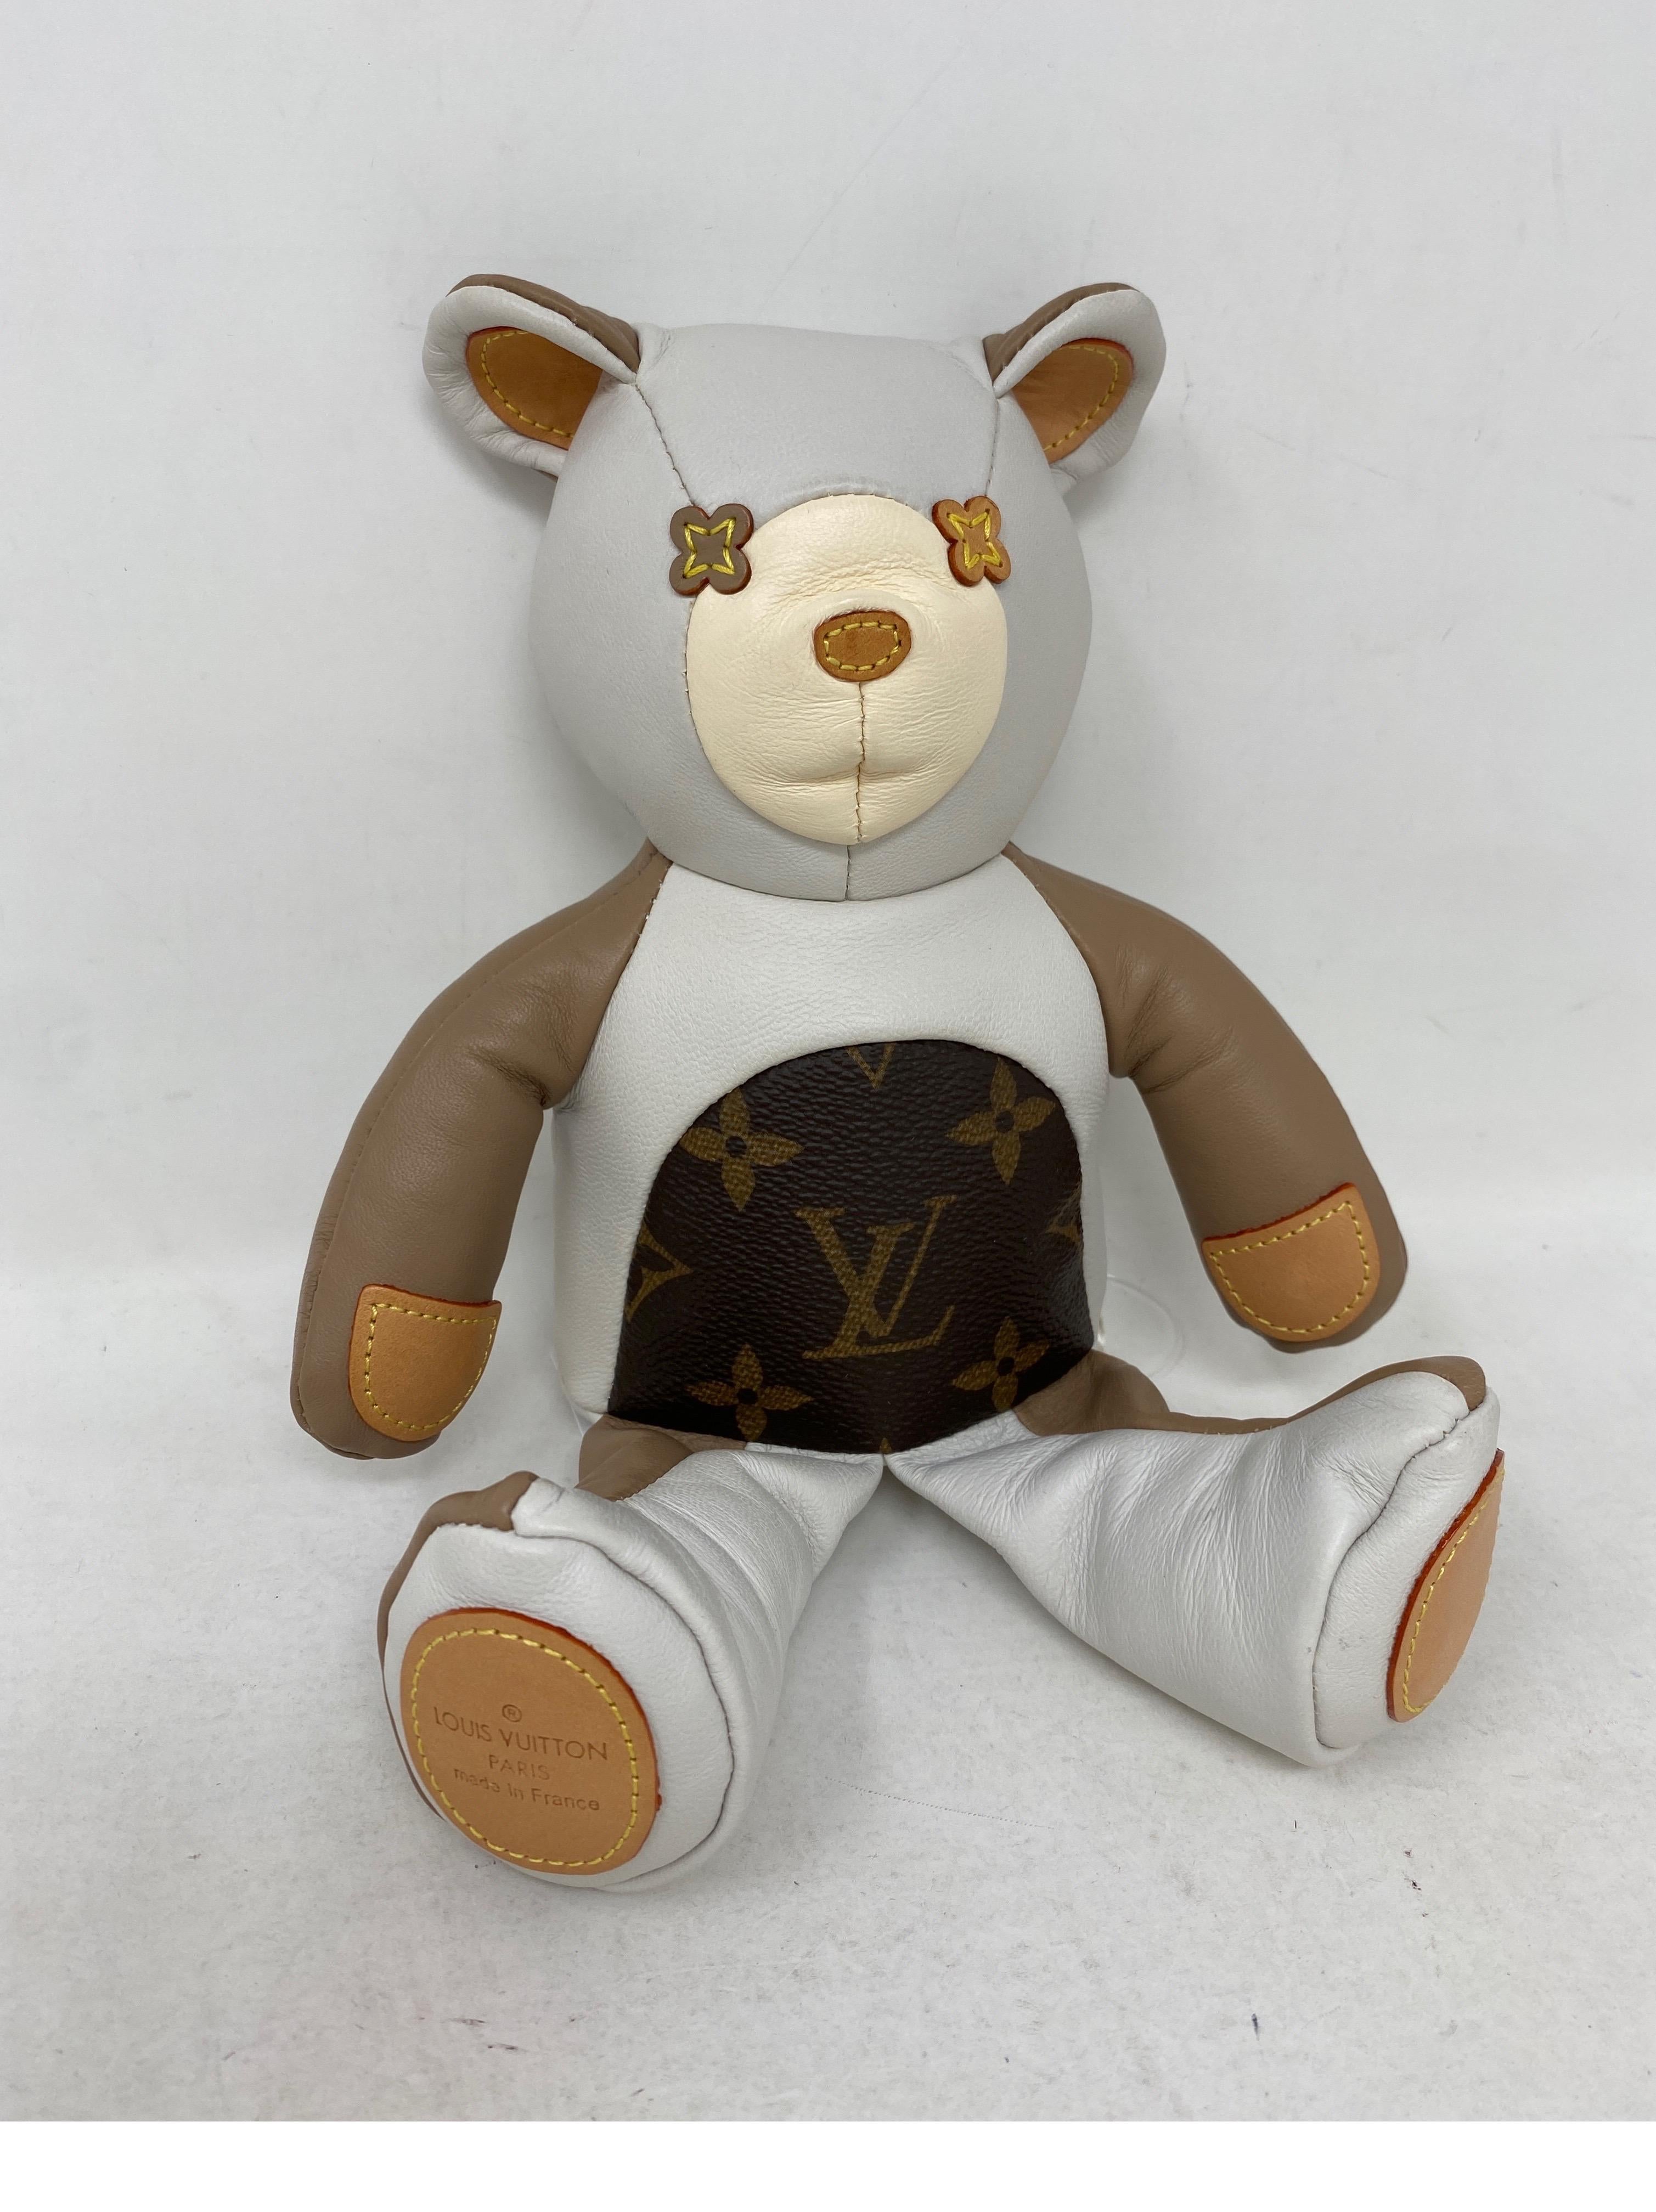 Louis Vuitton Teddy Bear. Rare and limited collection. Excellent like new condition. Collector's piece. Guaranteed authentic. 